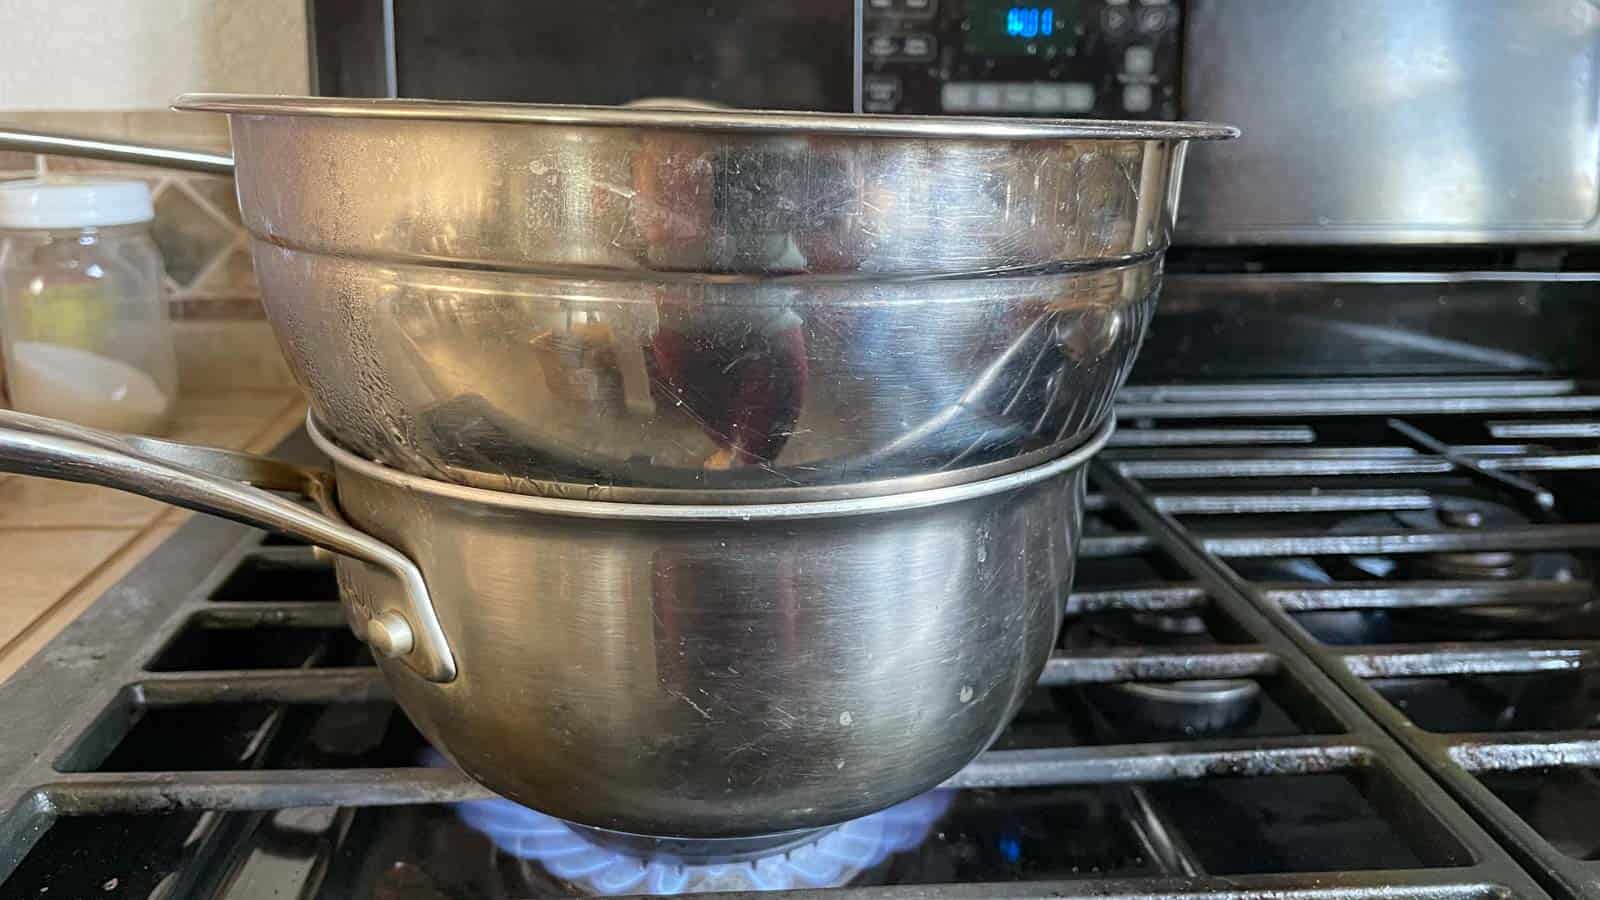 Cooking down runny batter on the stovetop